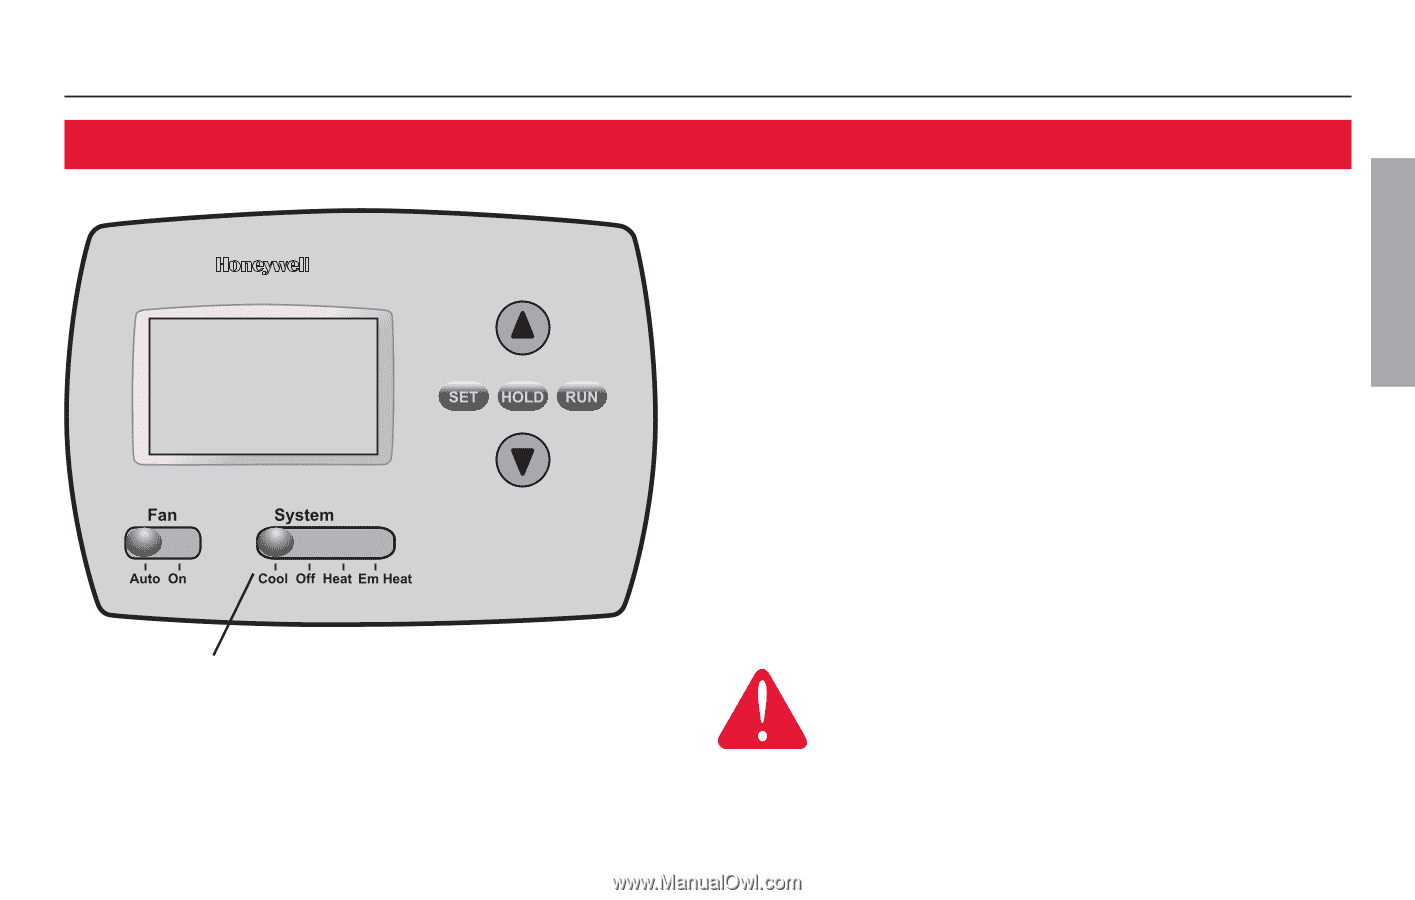 How To Reset Honeywell Thermostat Th4110d1007